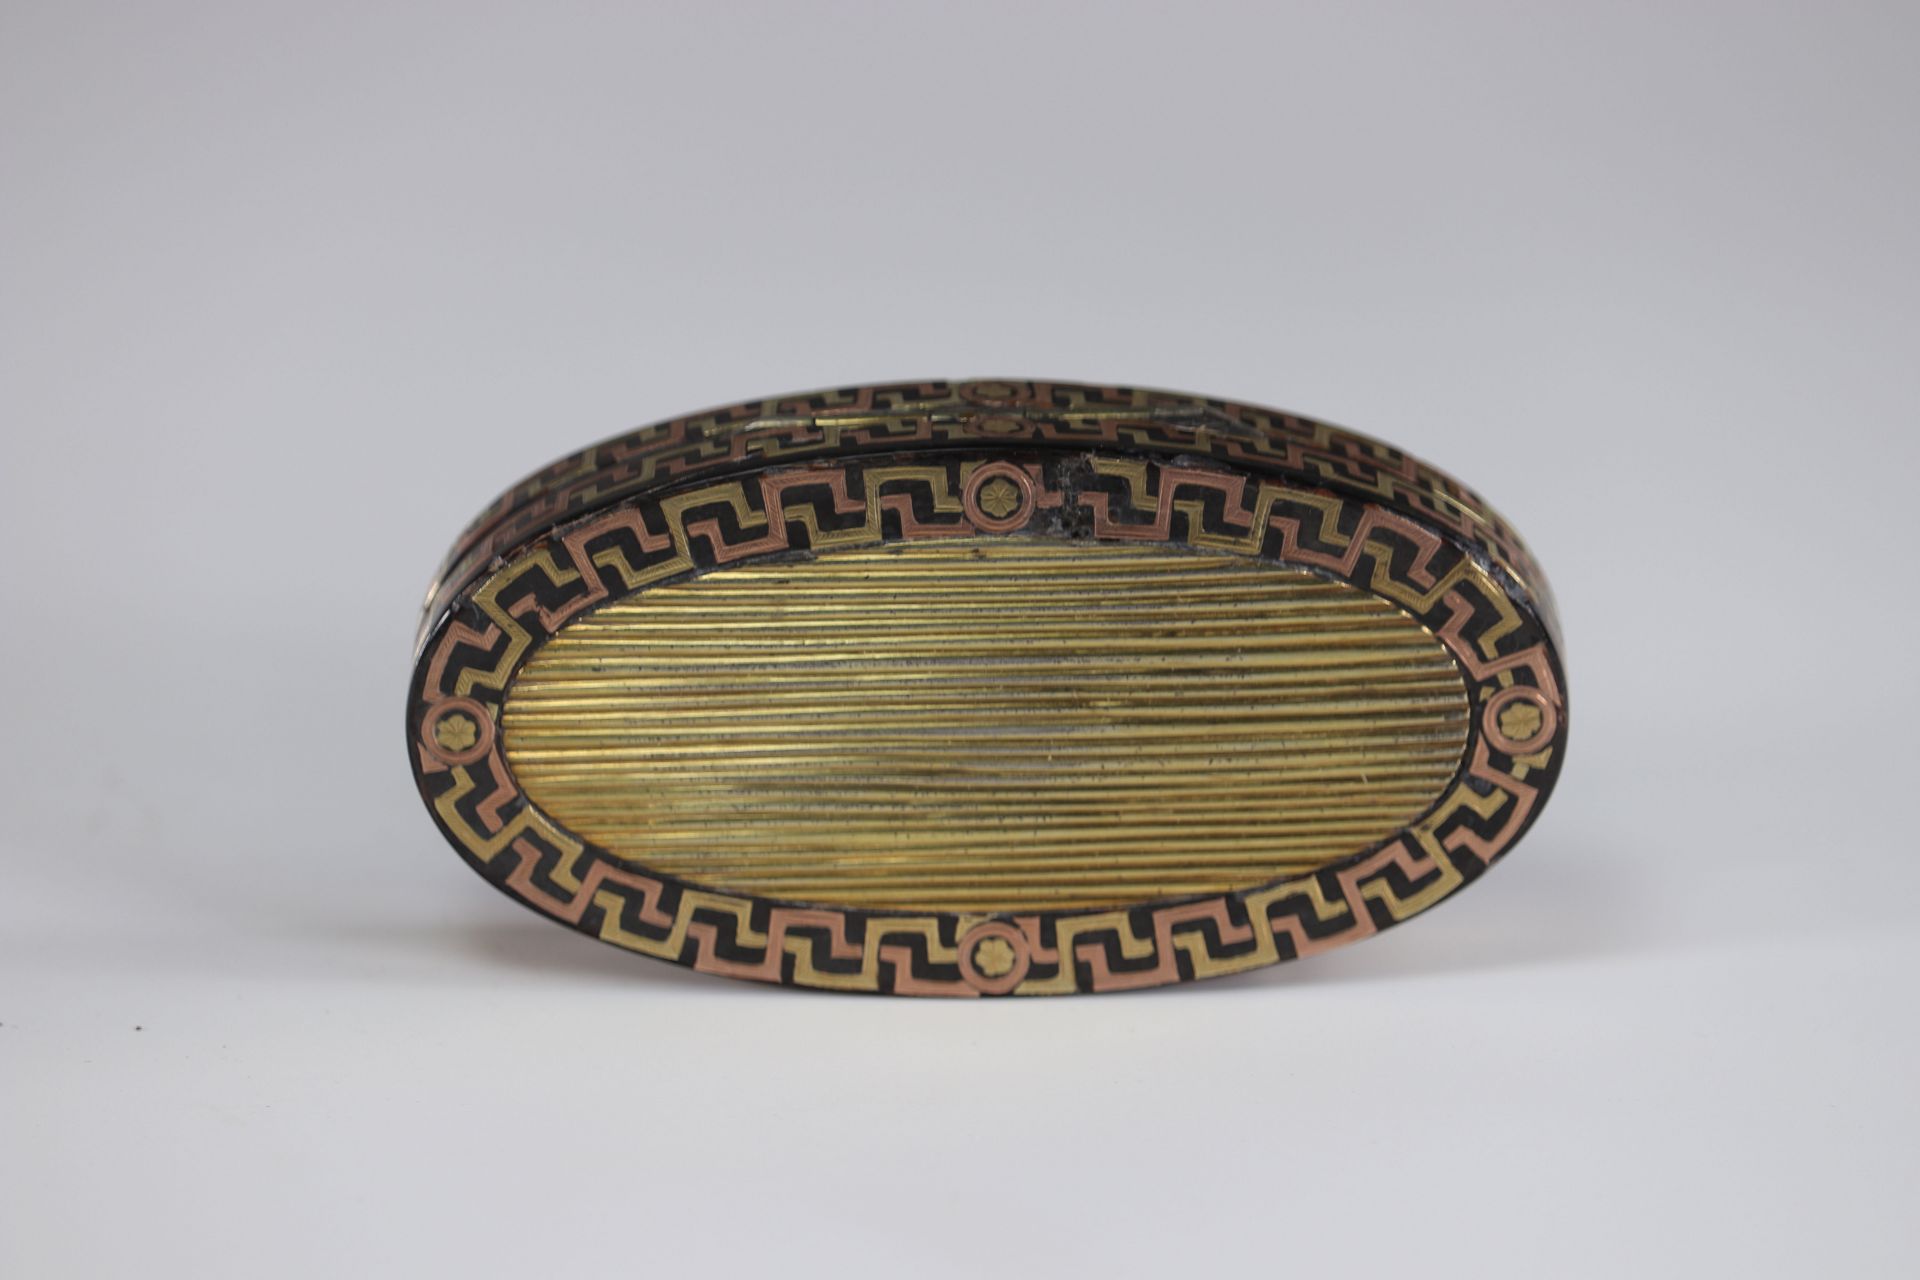 Snuffbox probably in gold and copper early 19th century